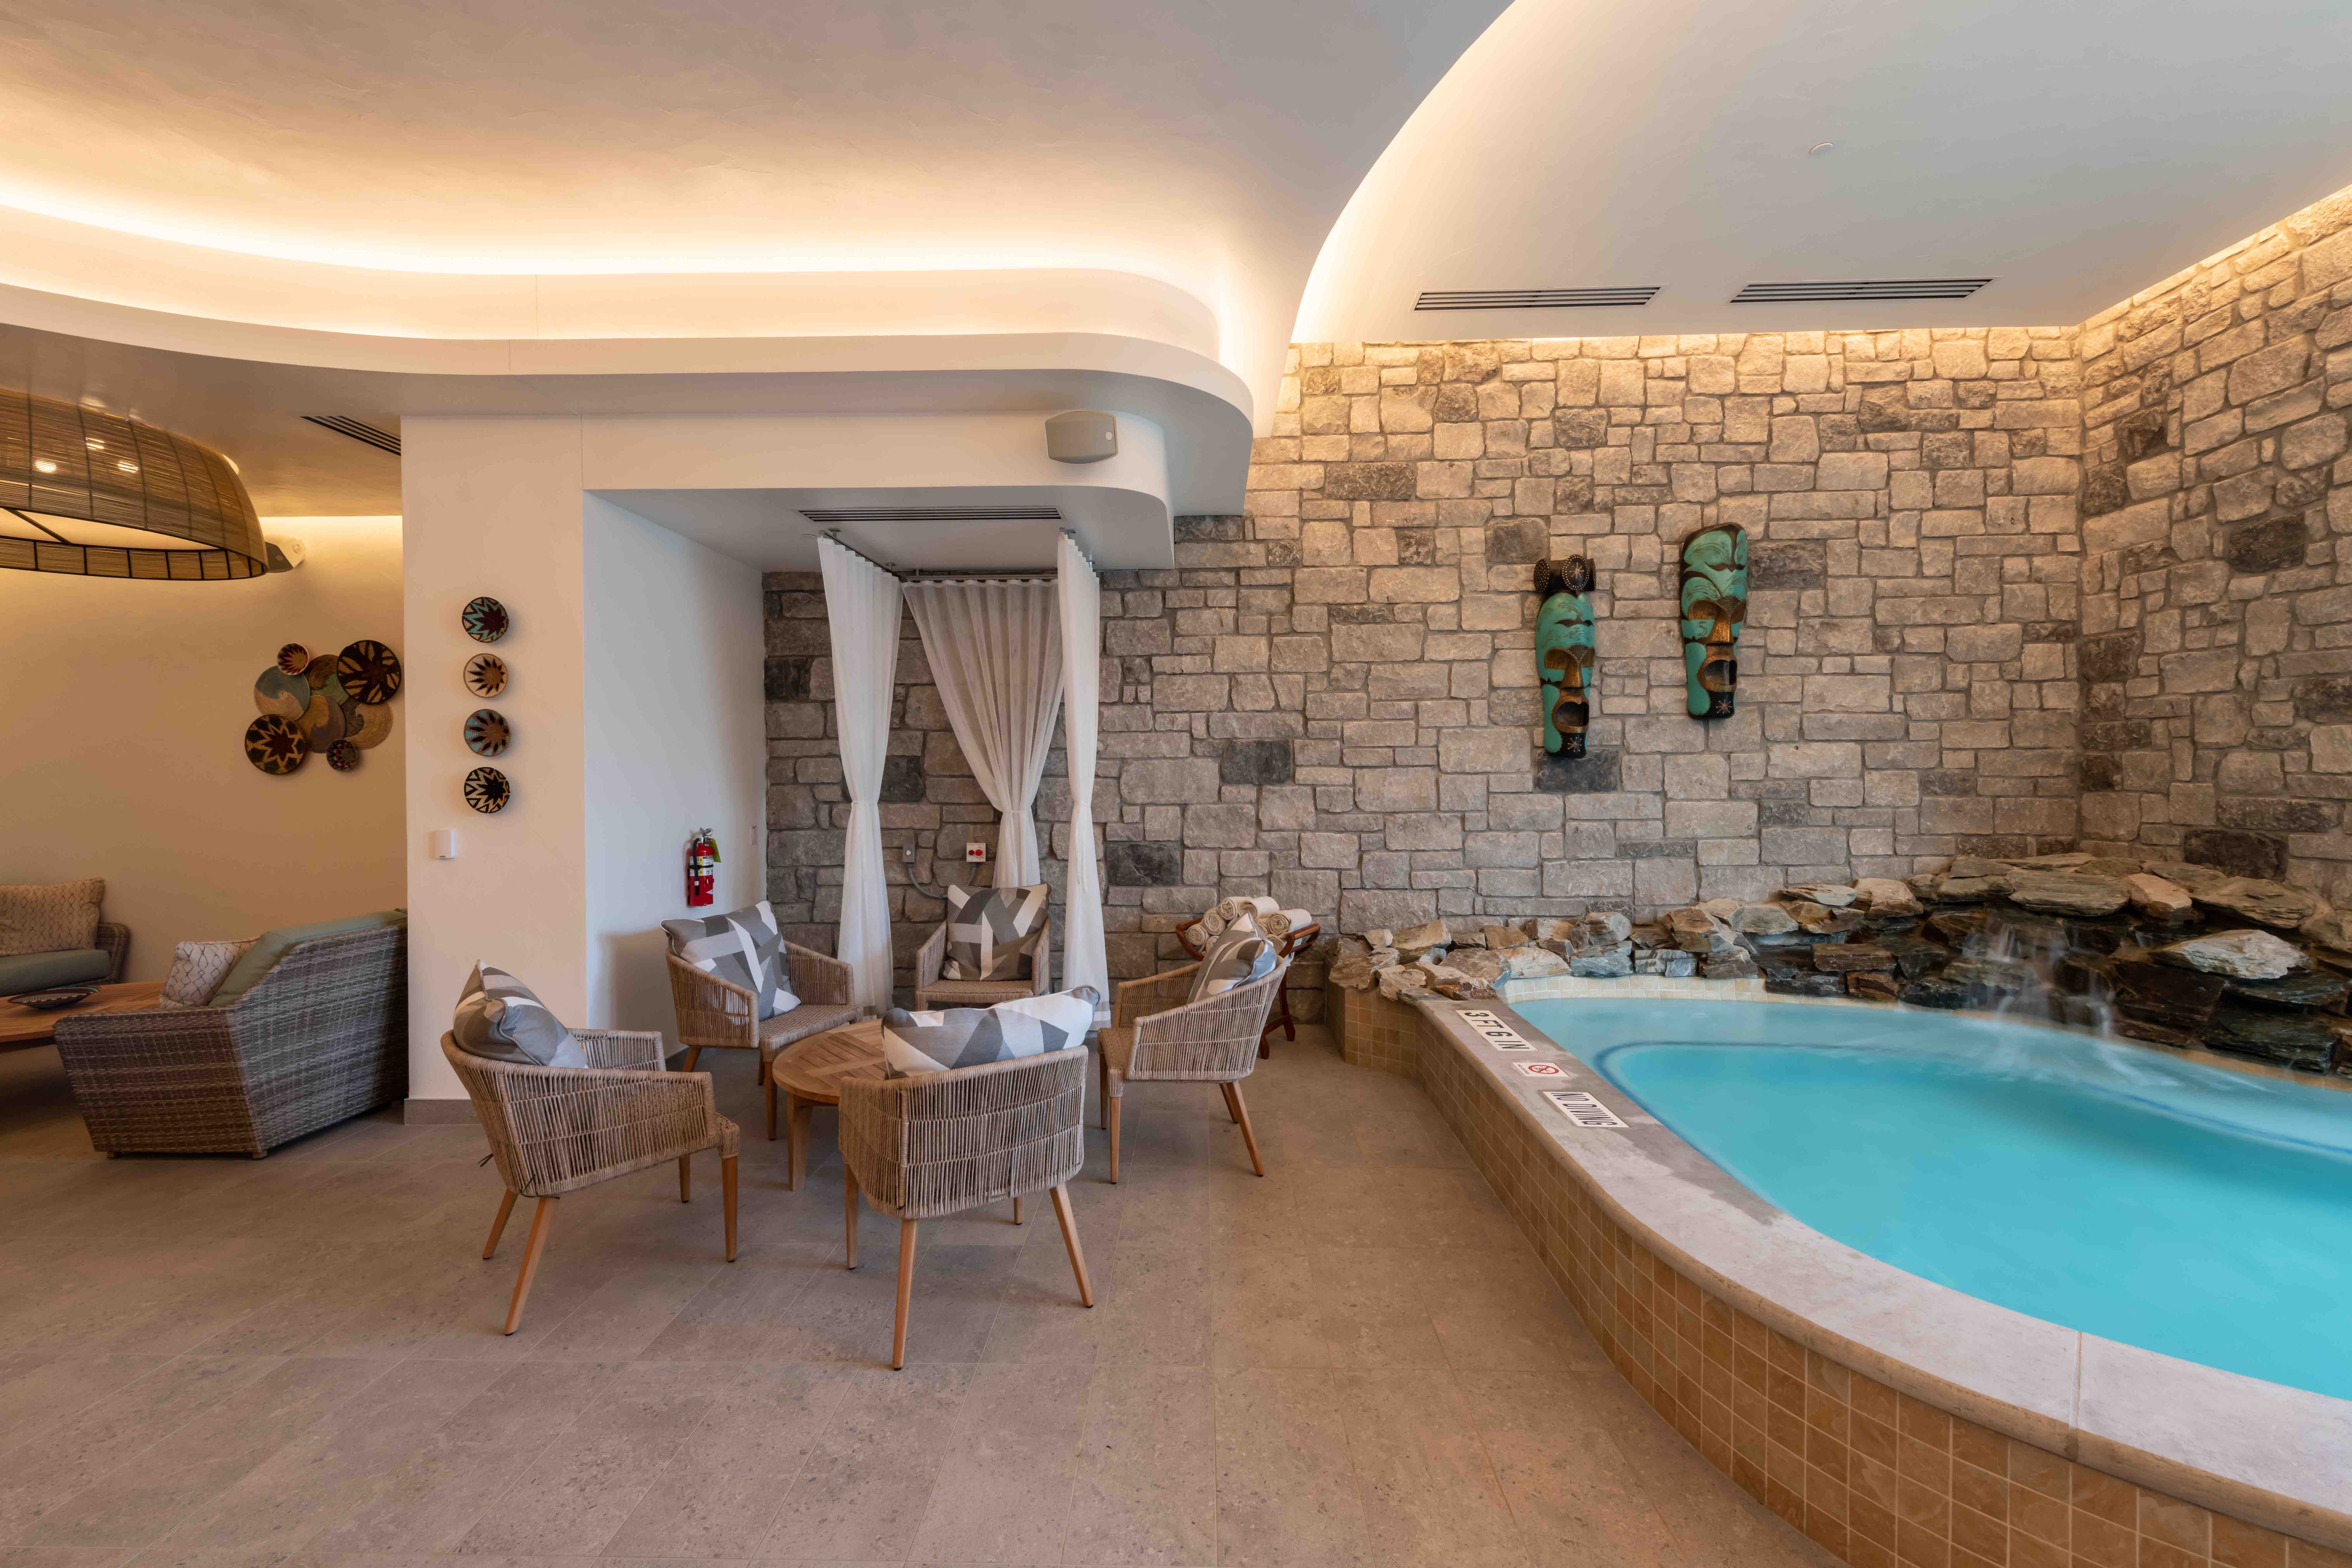 Spa with soaking tub and lounging chairs